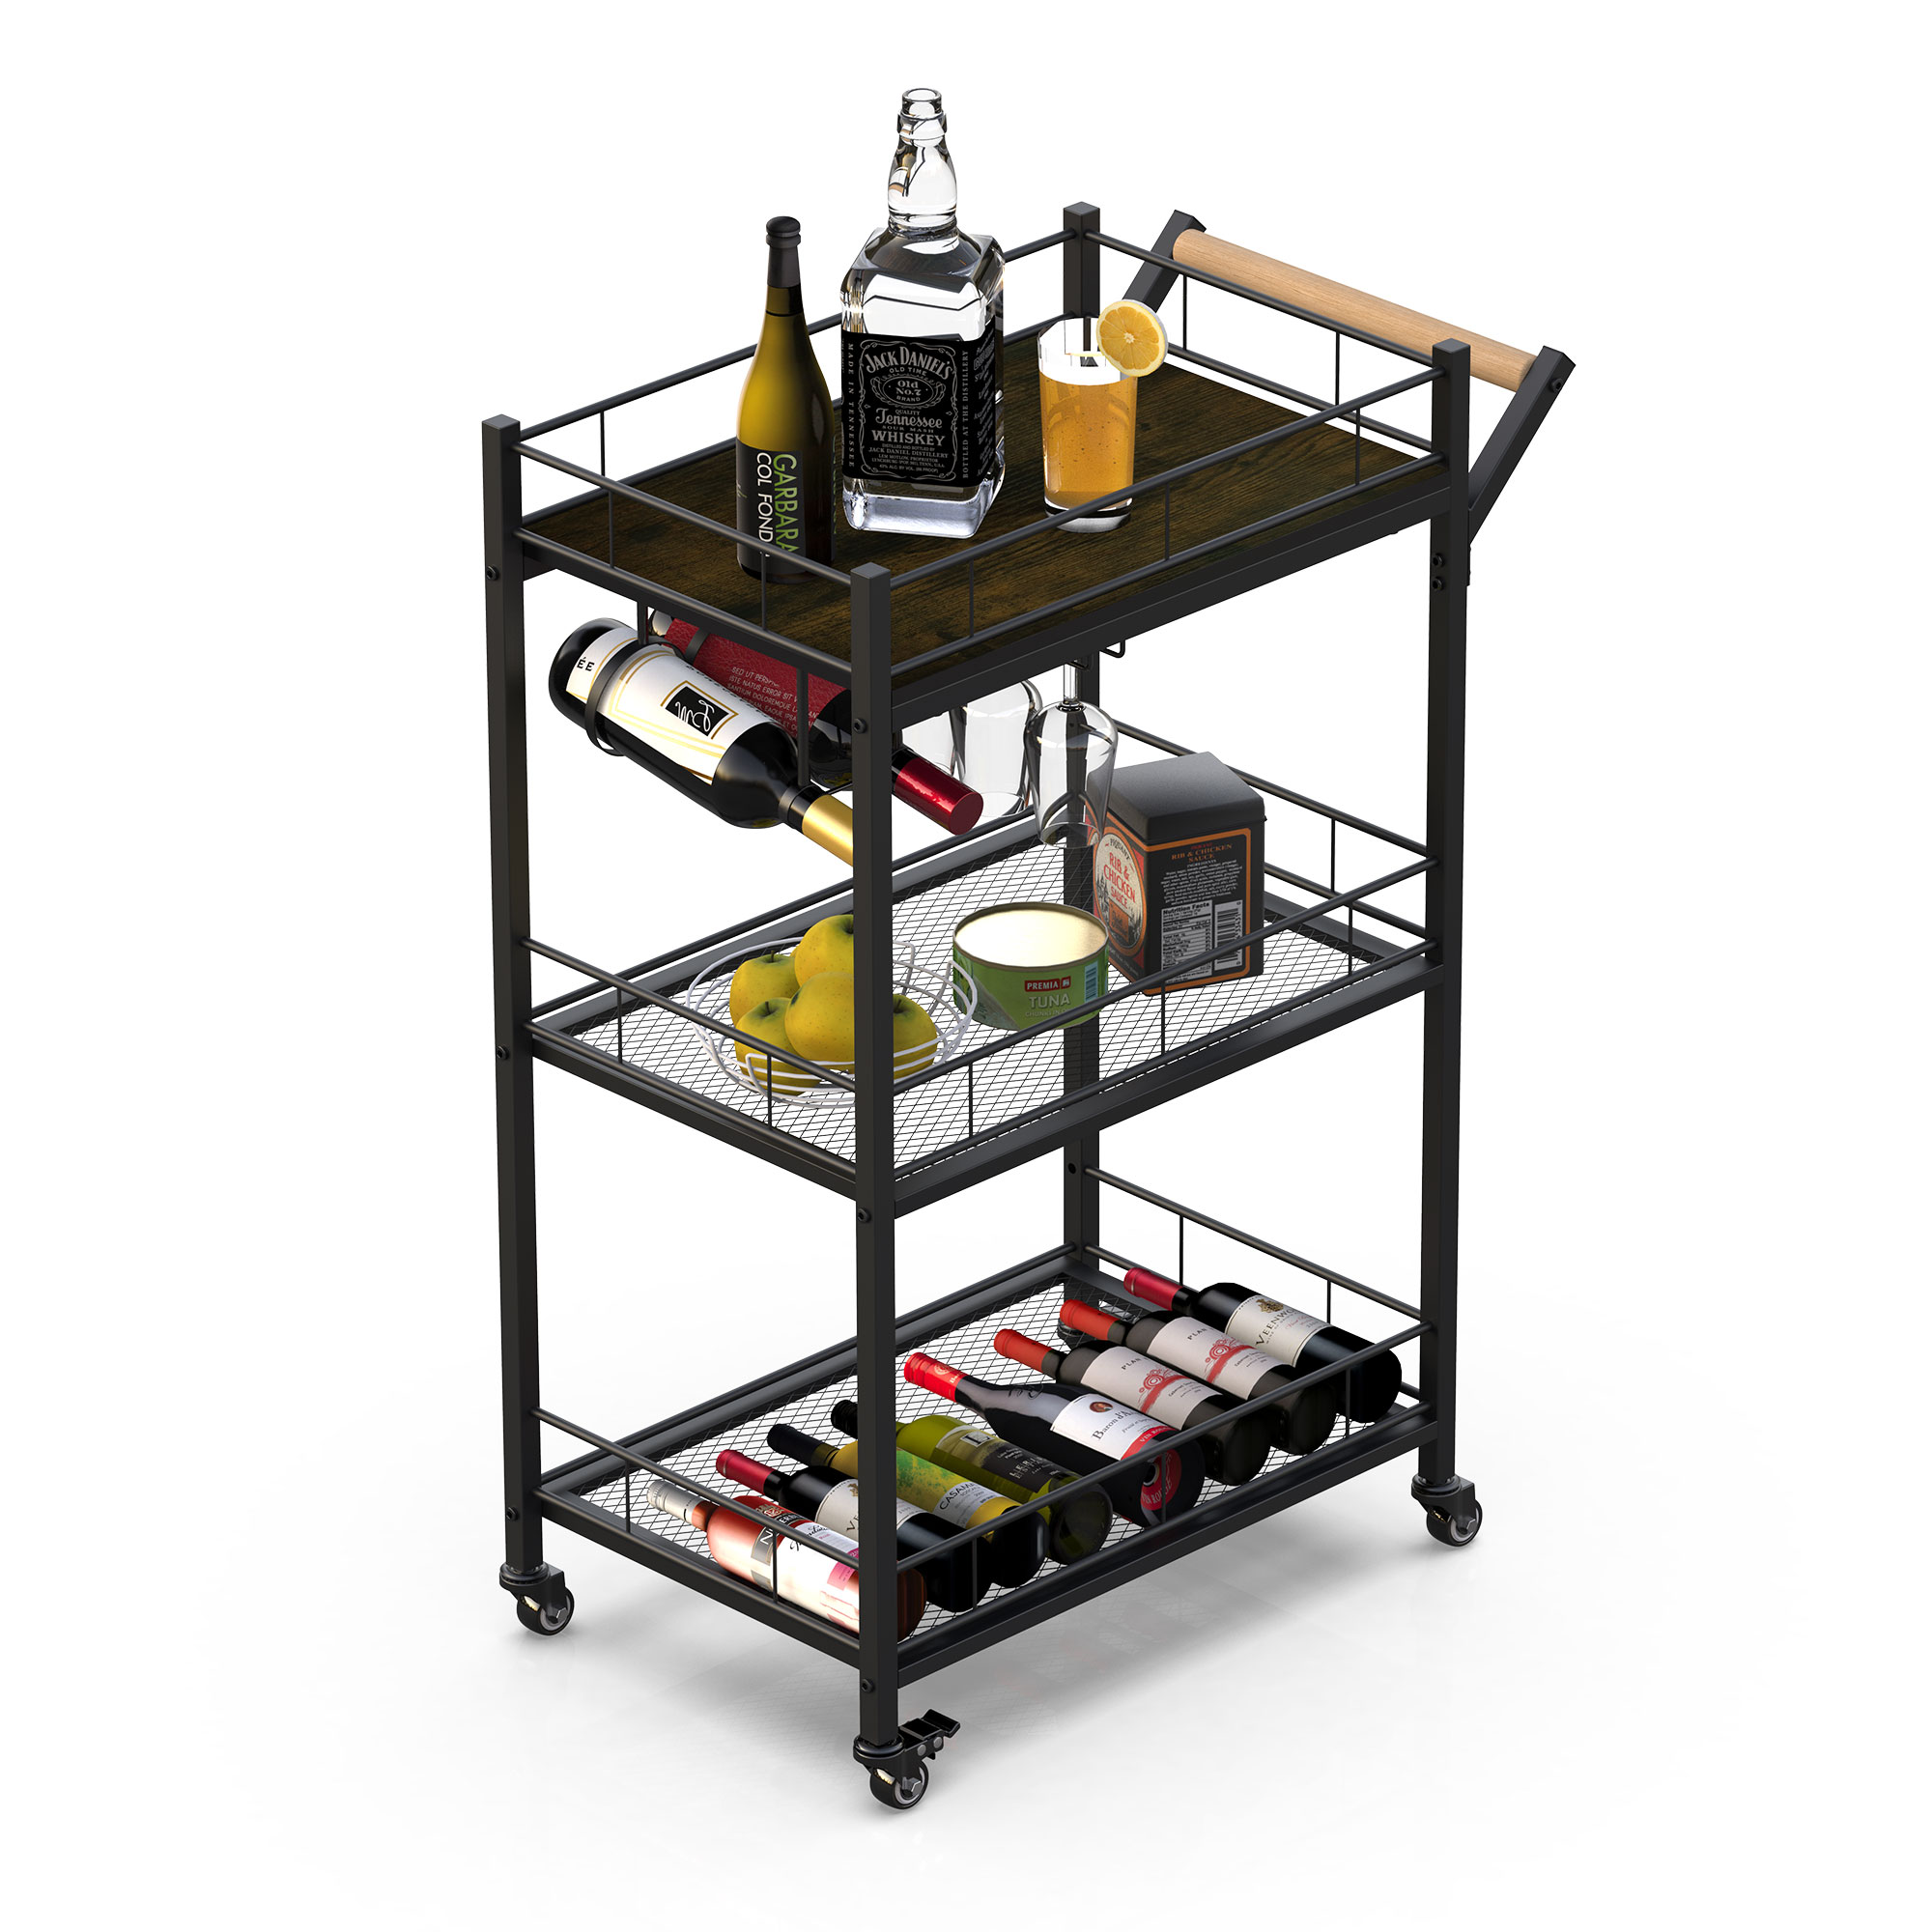 3 Tier Metal Mesh Rolling Storage Cart, Mesh Storage Pantry Cart with Lockable Wheels Wood Look Top and Metal Frame，Rolling Utility Cart for Kitchen Bathroom, Office, Library, Coffee Bar-Boyel Living